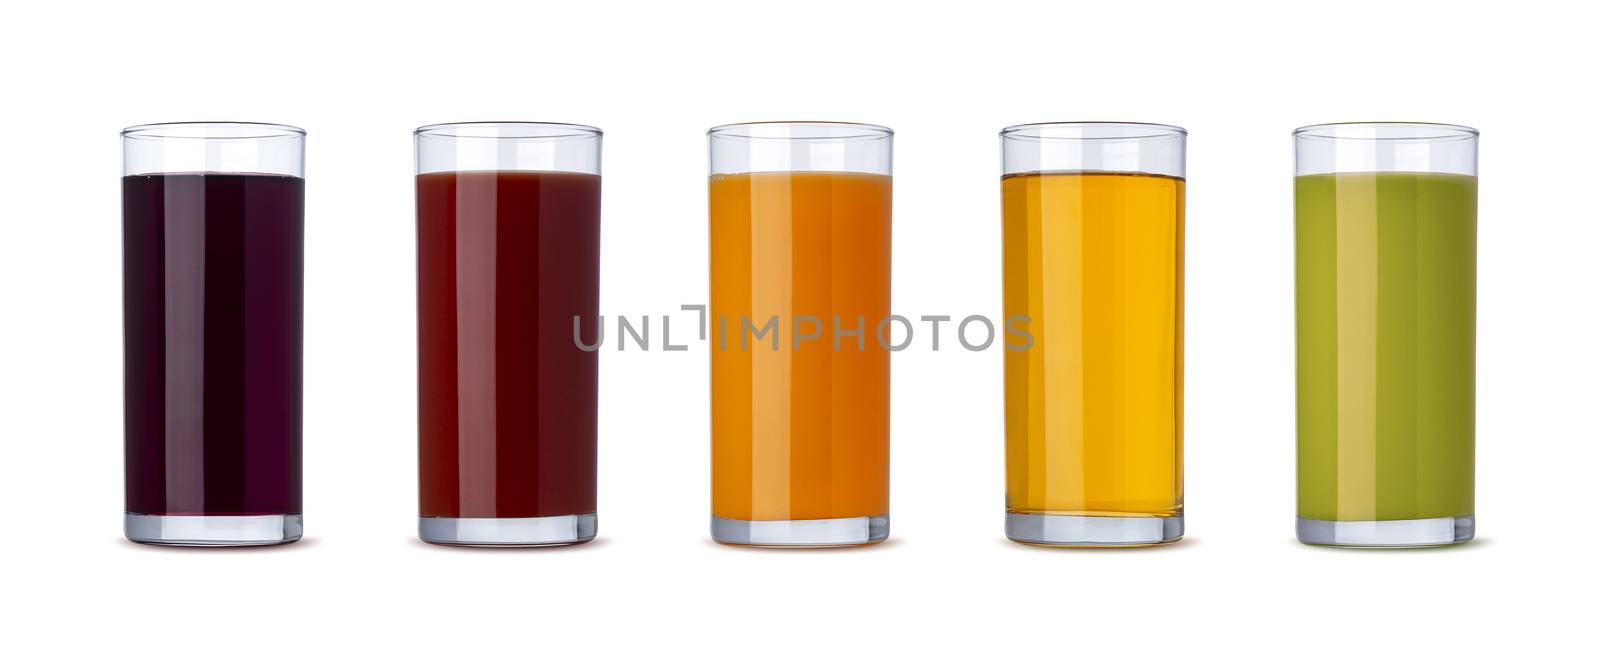 Collection of different juices, Orange, Cherry, Grape, Tomato and Apple. Fresh vegetable and fruit juice in glass isolated on white background with clipping path